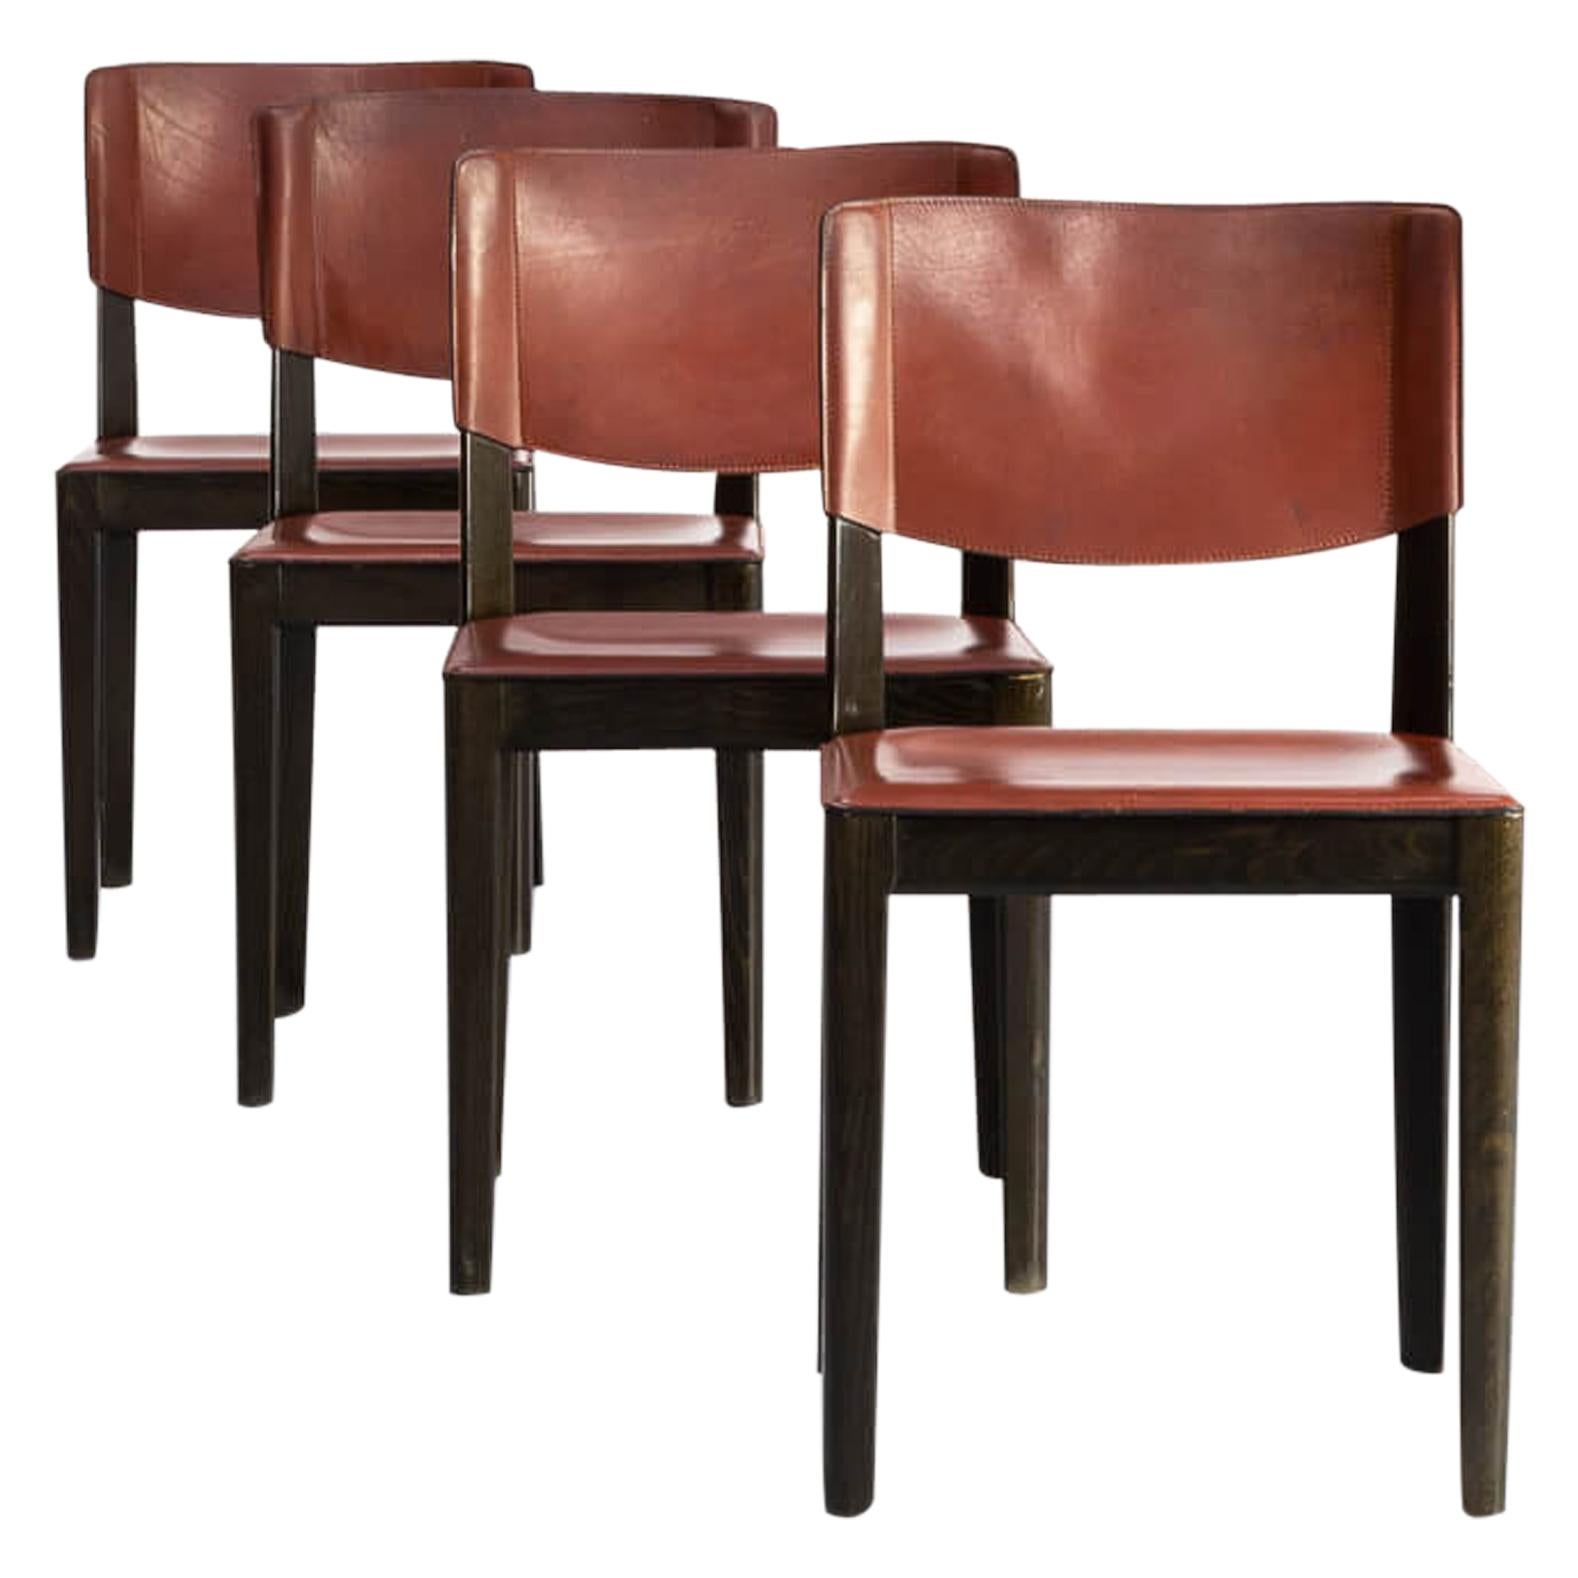 1960s Leather Dining Chairs on Wooden Feet for Matteo Grassi Set of 4 For Sale